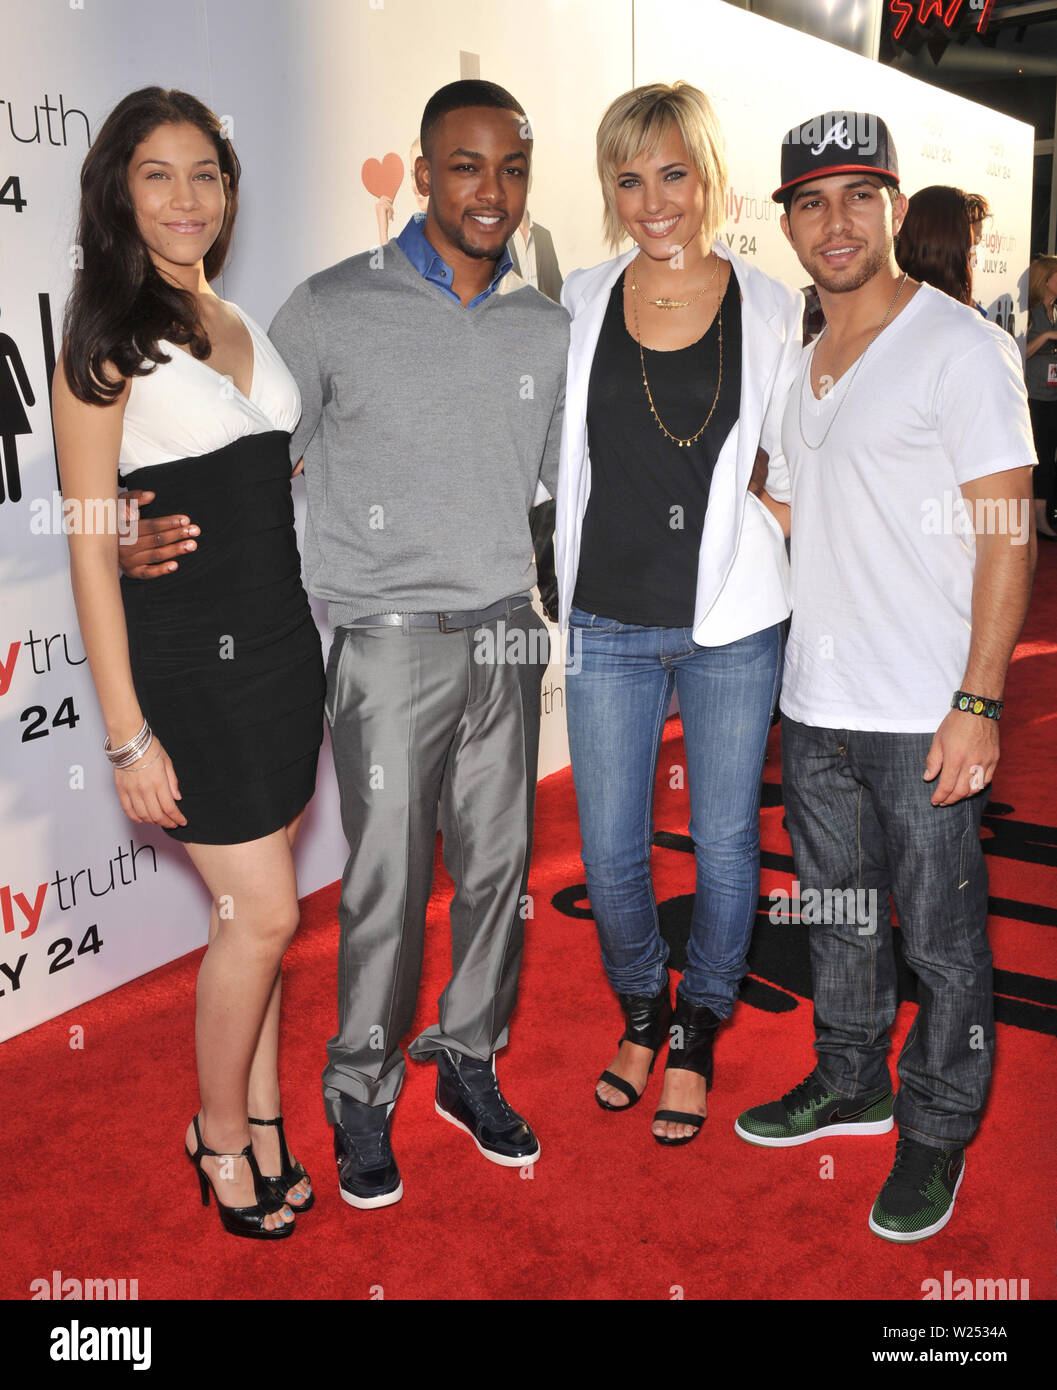 LOS ANGELES, CA. July 16, 2009: Fame stars Kristy Flores, Collins Pennie, Kherington Payne & Walter Perez at the premiere of 'The Ugly Truth' at the Cinerama Dome, Hollywood. © 2009 Paul Smith / Featureflash Stock Photo